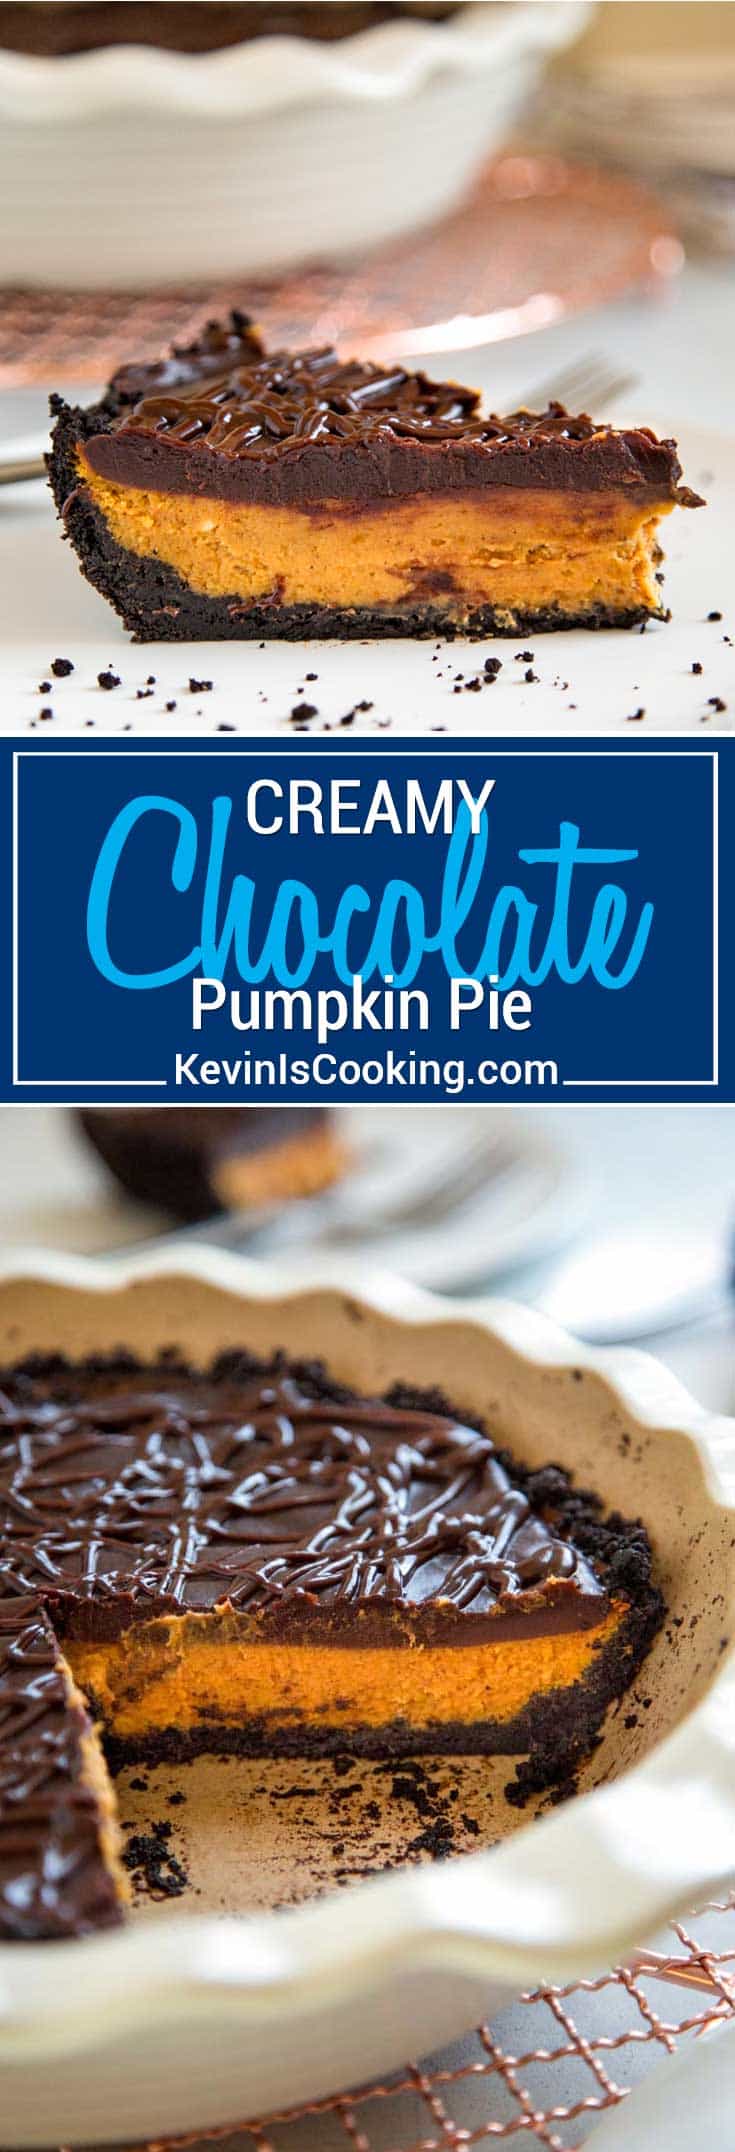 For this Chocolate Glazed Pumpkin Pie I layered a delicious chocolate ganache on top of the creamy pumpkin filling with a chocolate cookie crust for a spin on the classic pumpkin pie.